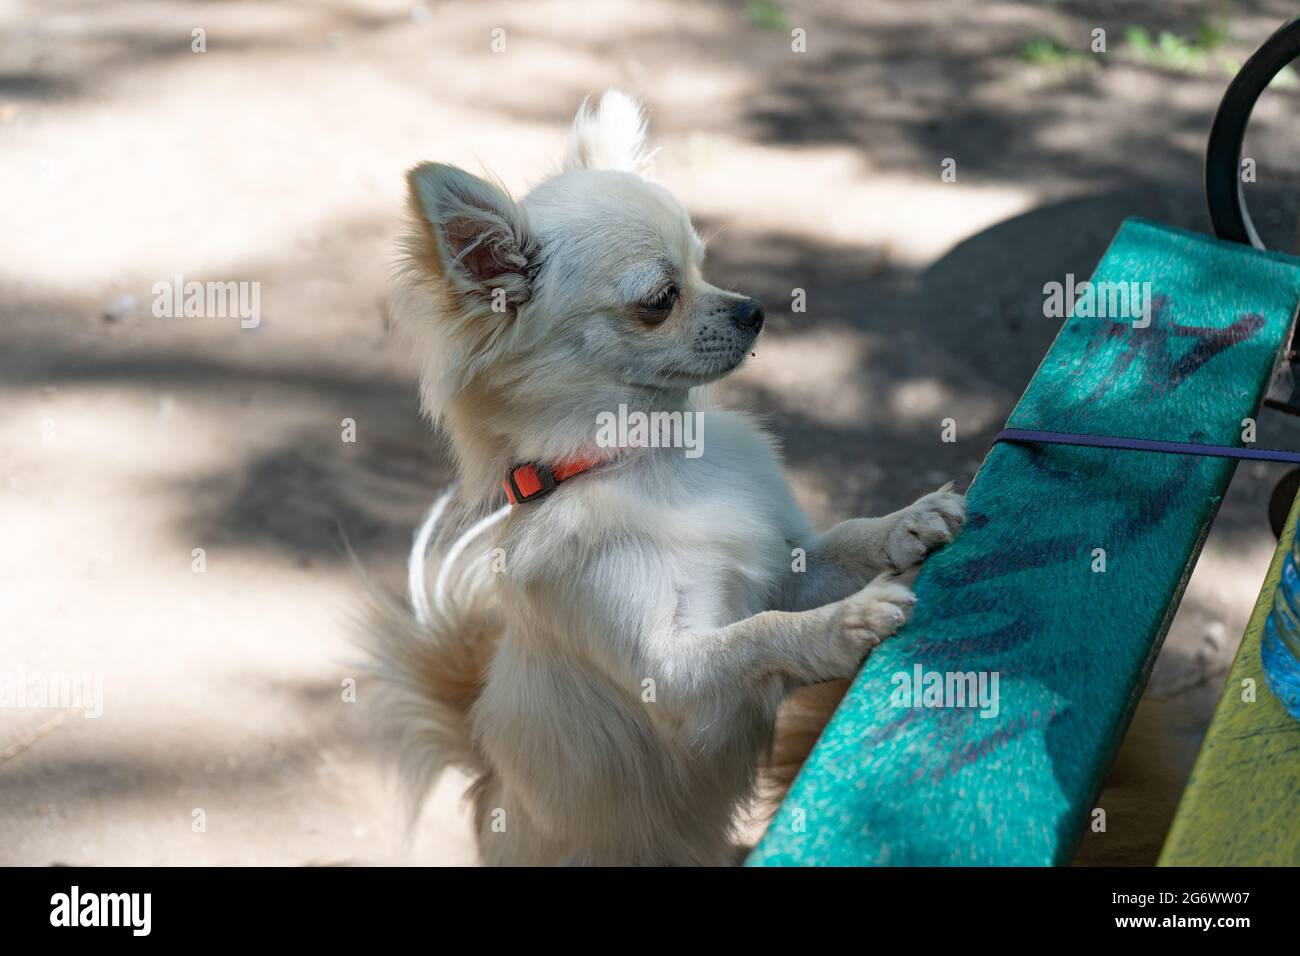 A young beige chihuahua puppy  standing with its front paws on a bench. Home pets. Small breed. Outdoors Stock Photo